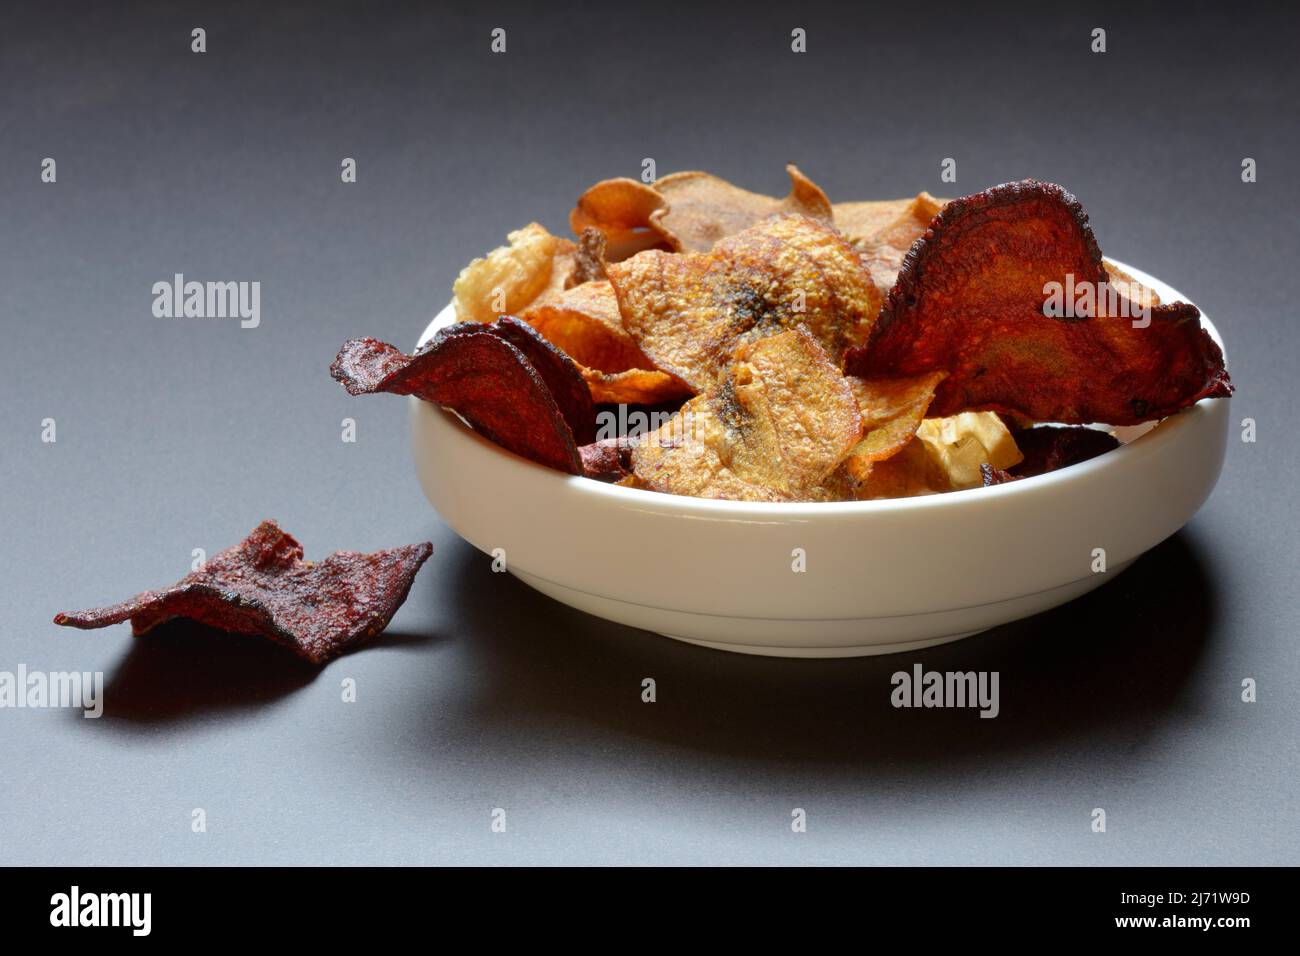 Vegetable chips in shell, consisting of carrots, beetroot and parsnips Stock Photo